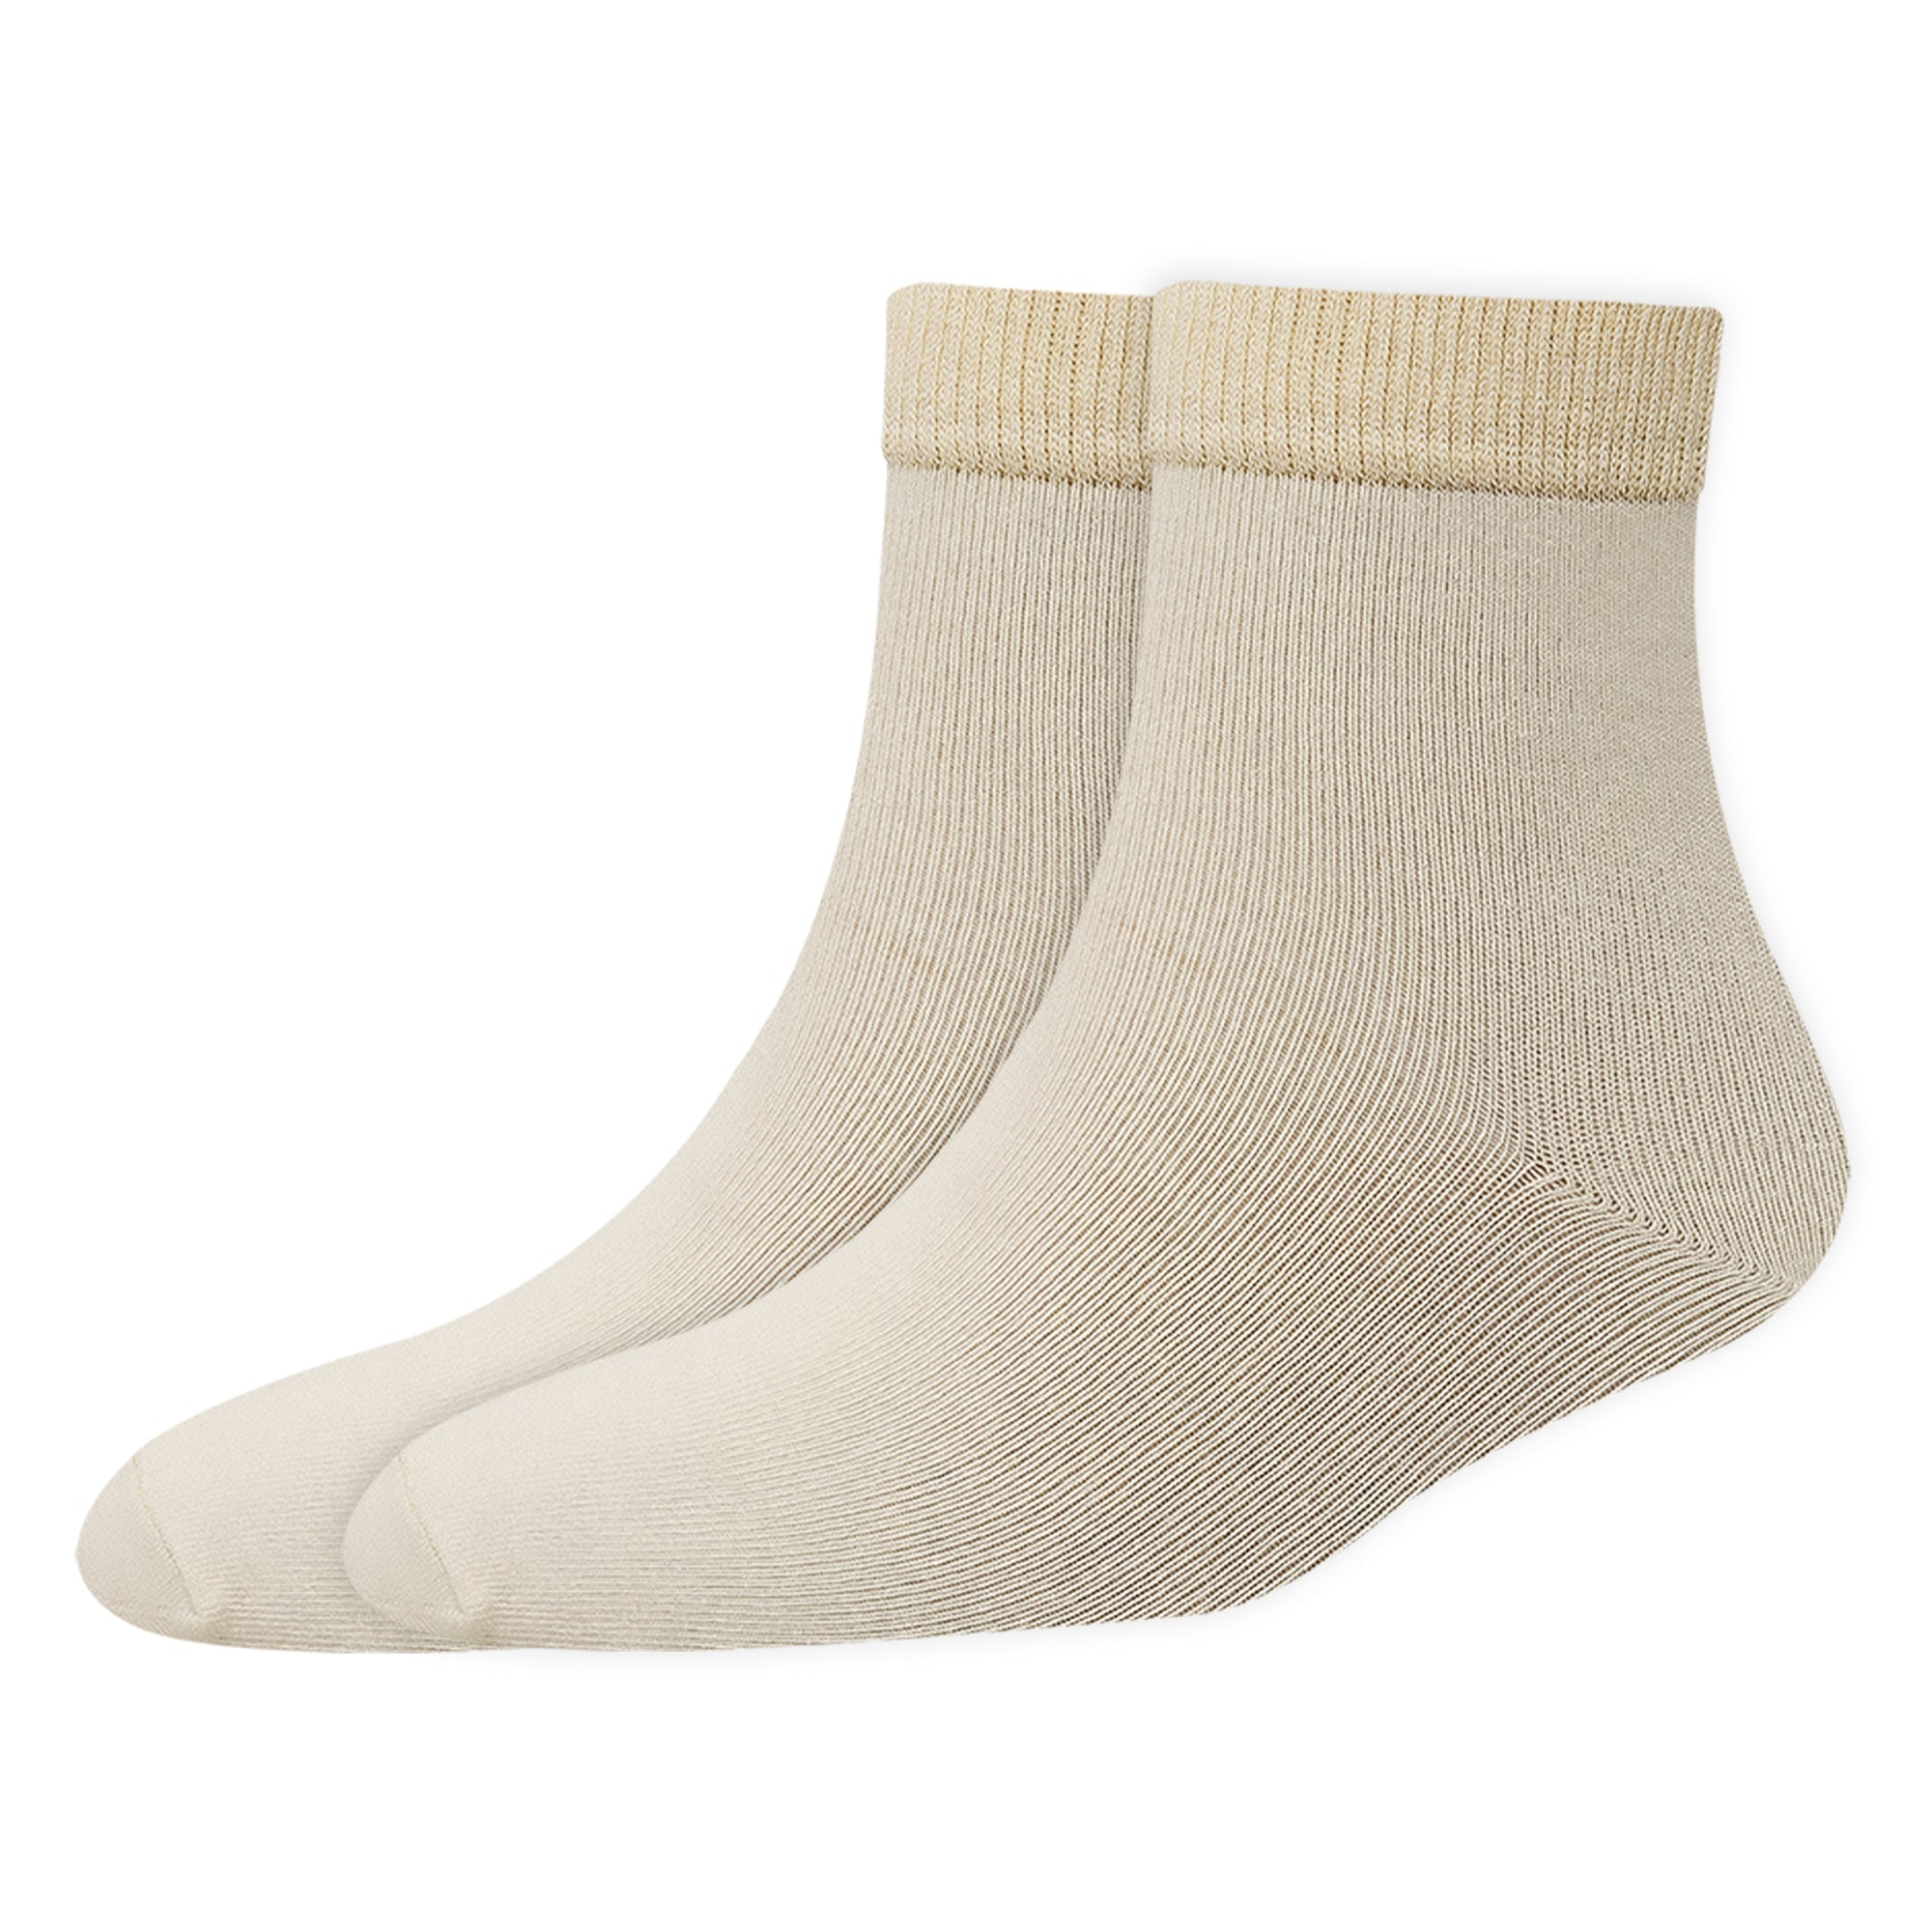 Young Wings Eco Friendly Ankle socks (Unisex) - Pack of 3